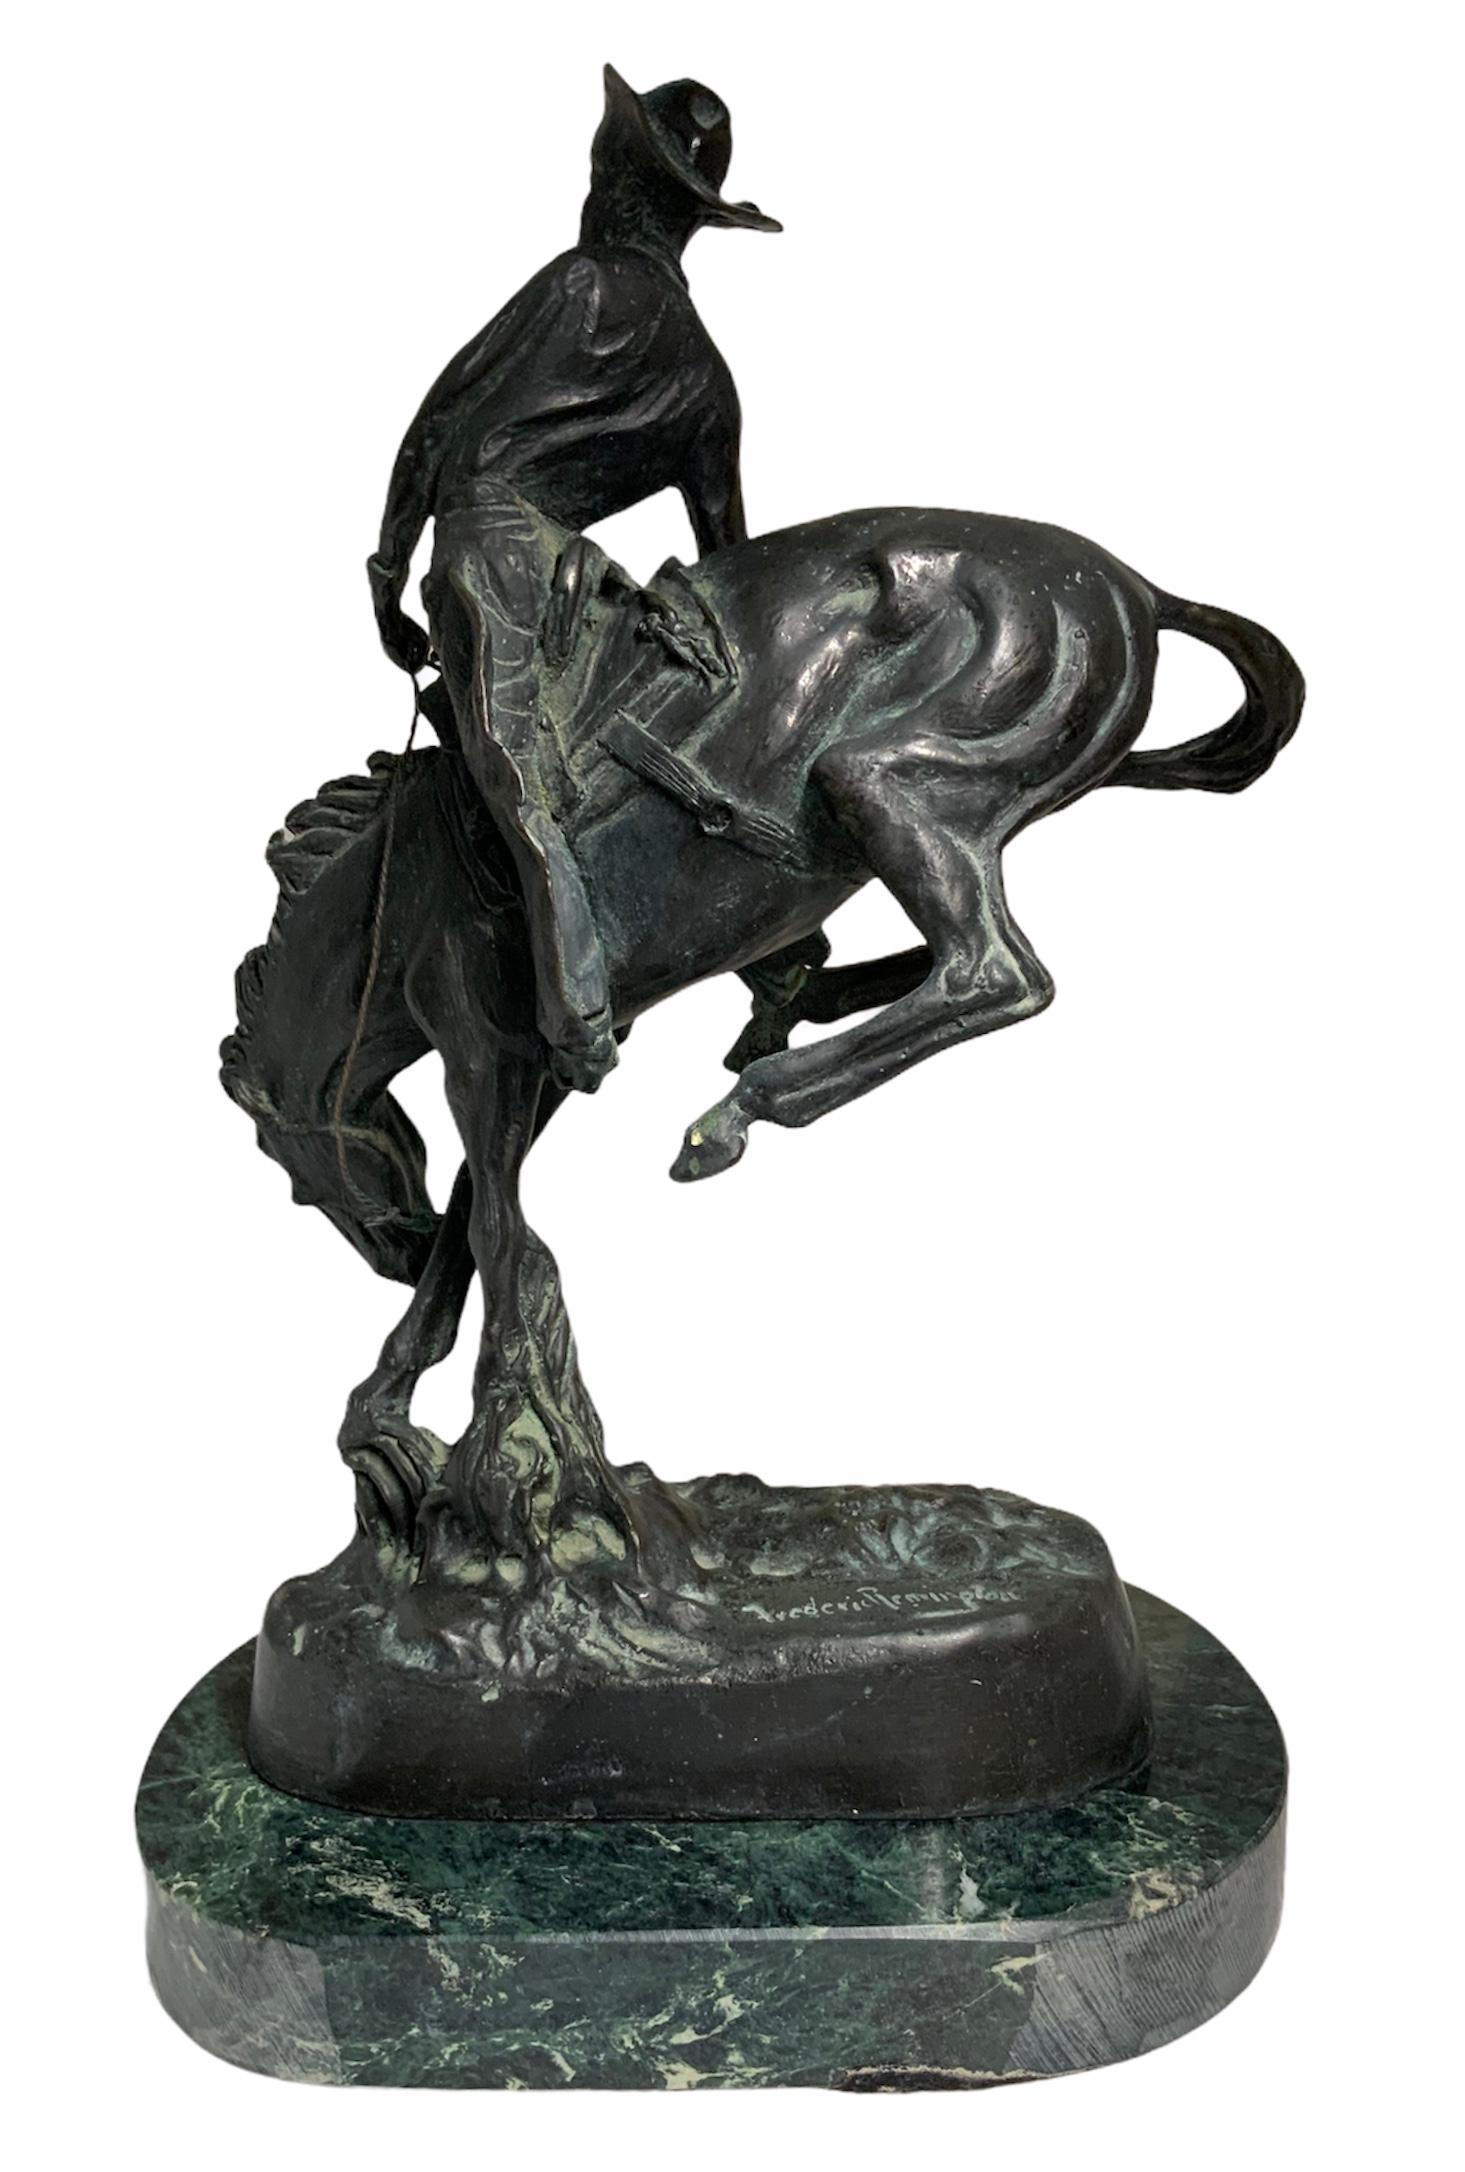 This is a Remington bronze sculpture depicting a cowboy riding a wild saddled horse. You can see the tension of the muscles of the horse and in the bent arc back of the cowboy. The back of the bronze base is signed Frederic Remington. The sculpture